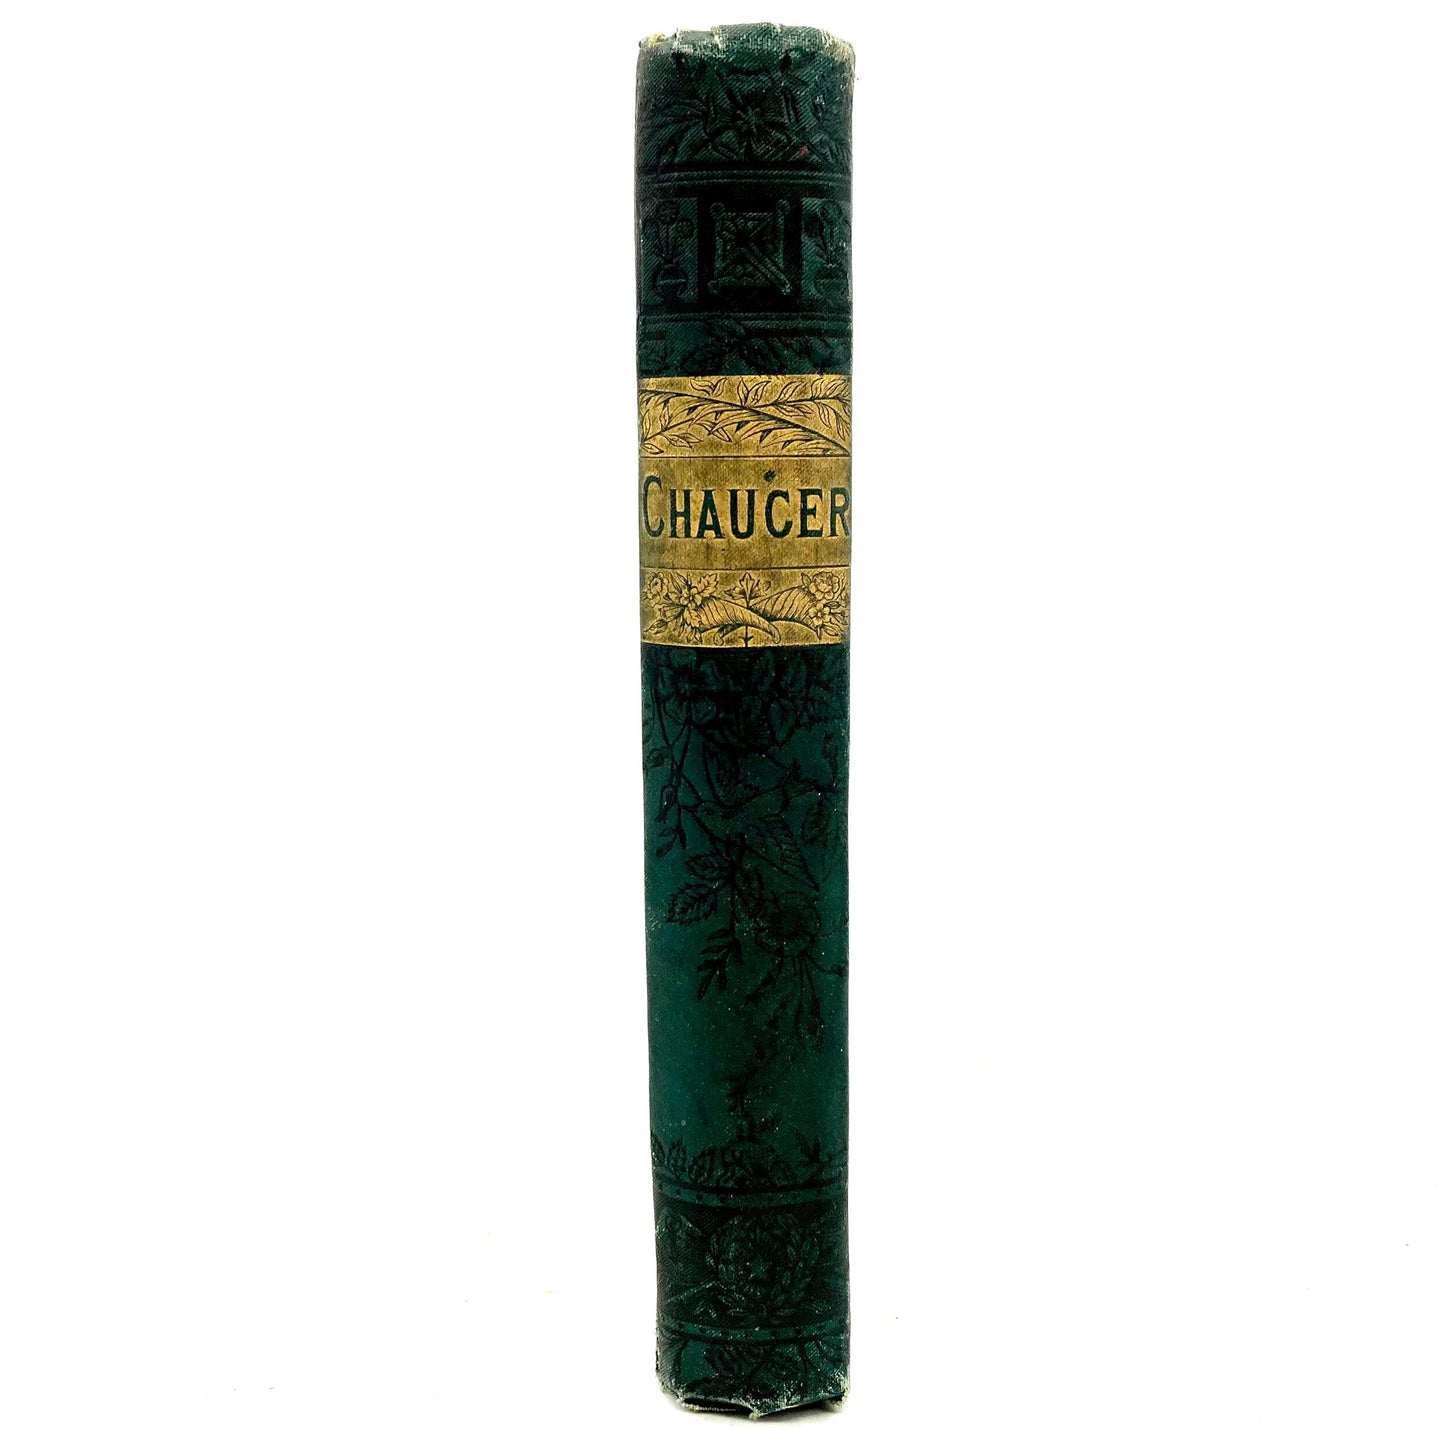 CHAUCER, Geoffrey "The Poetical Works of Geoffrey Chaucer, incl. Canterbury Tales" [John Wurtele Lovell, 1880] - Buzz Bookstore